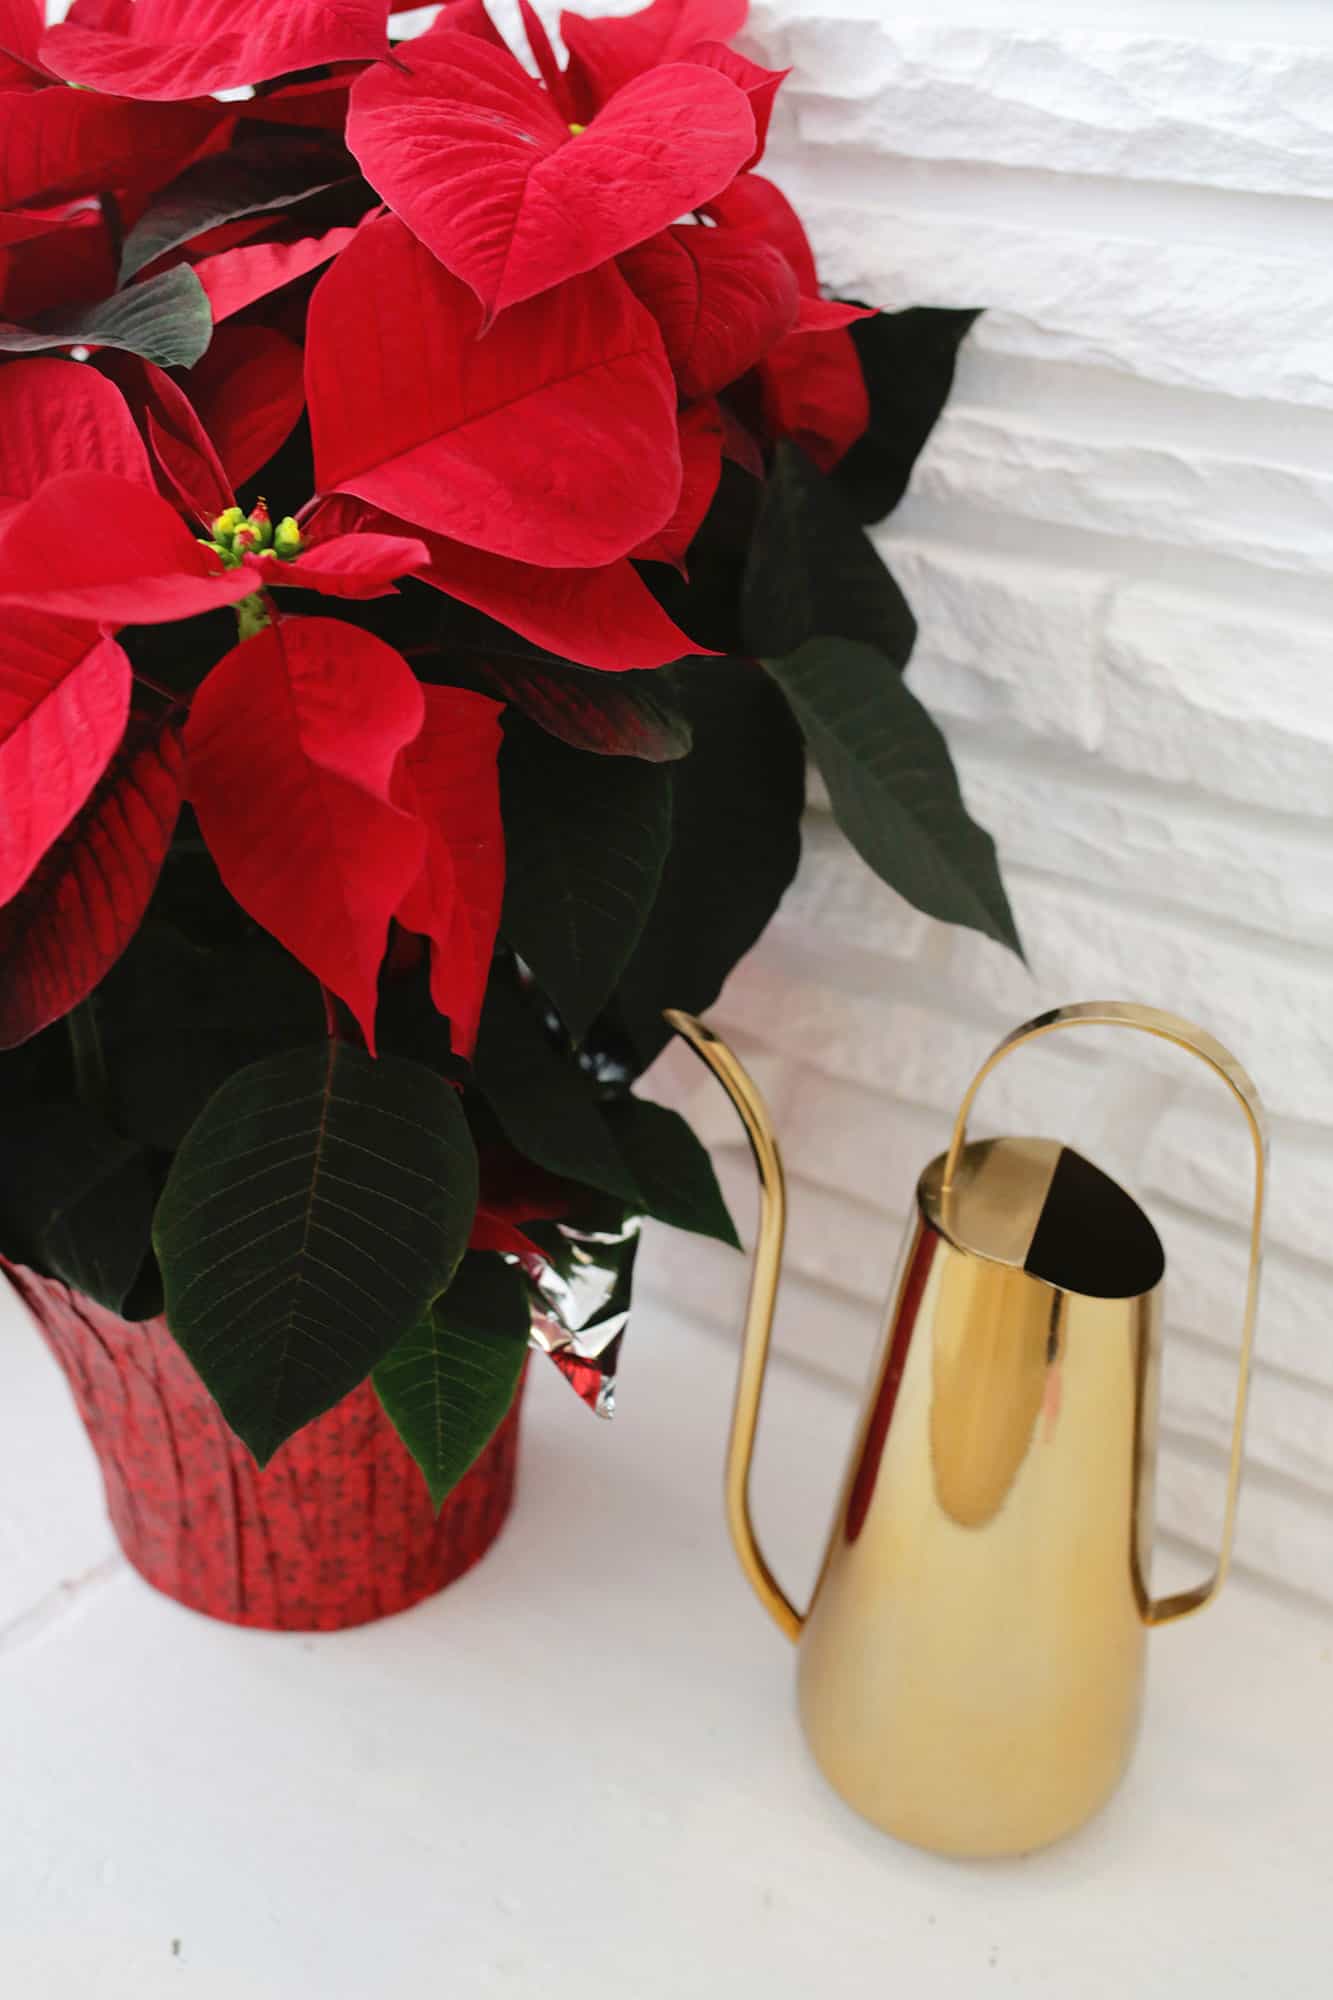 poinsettia and a watering can